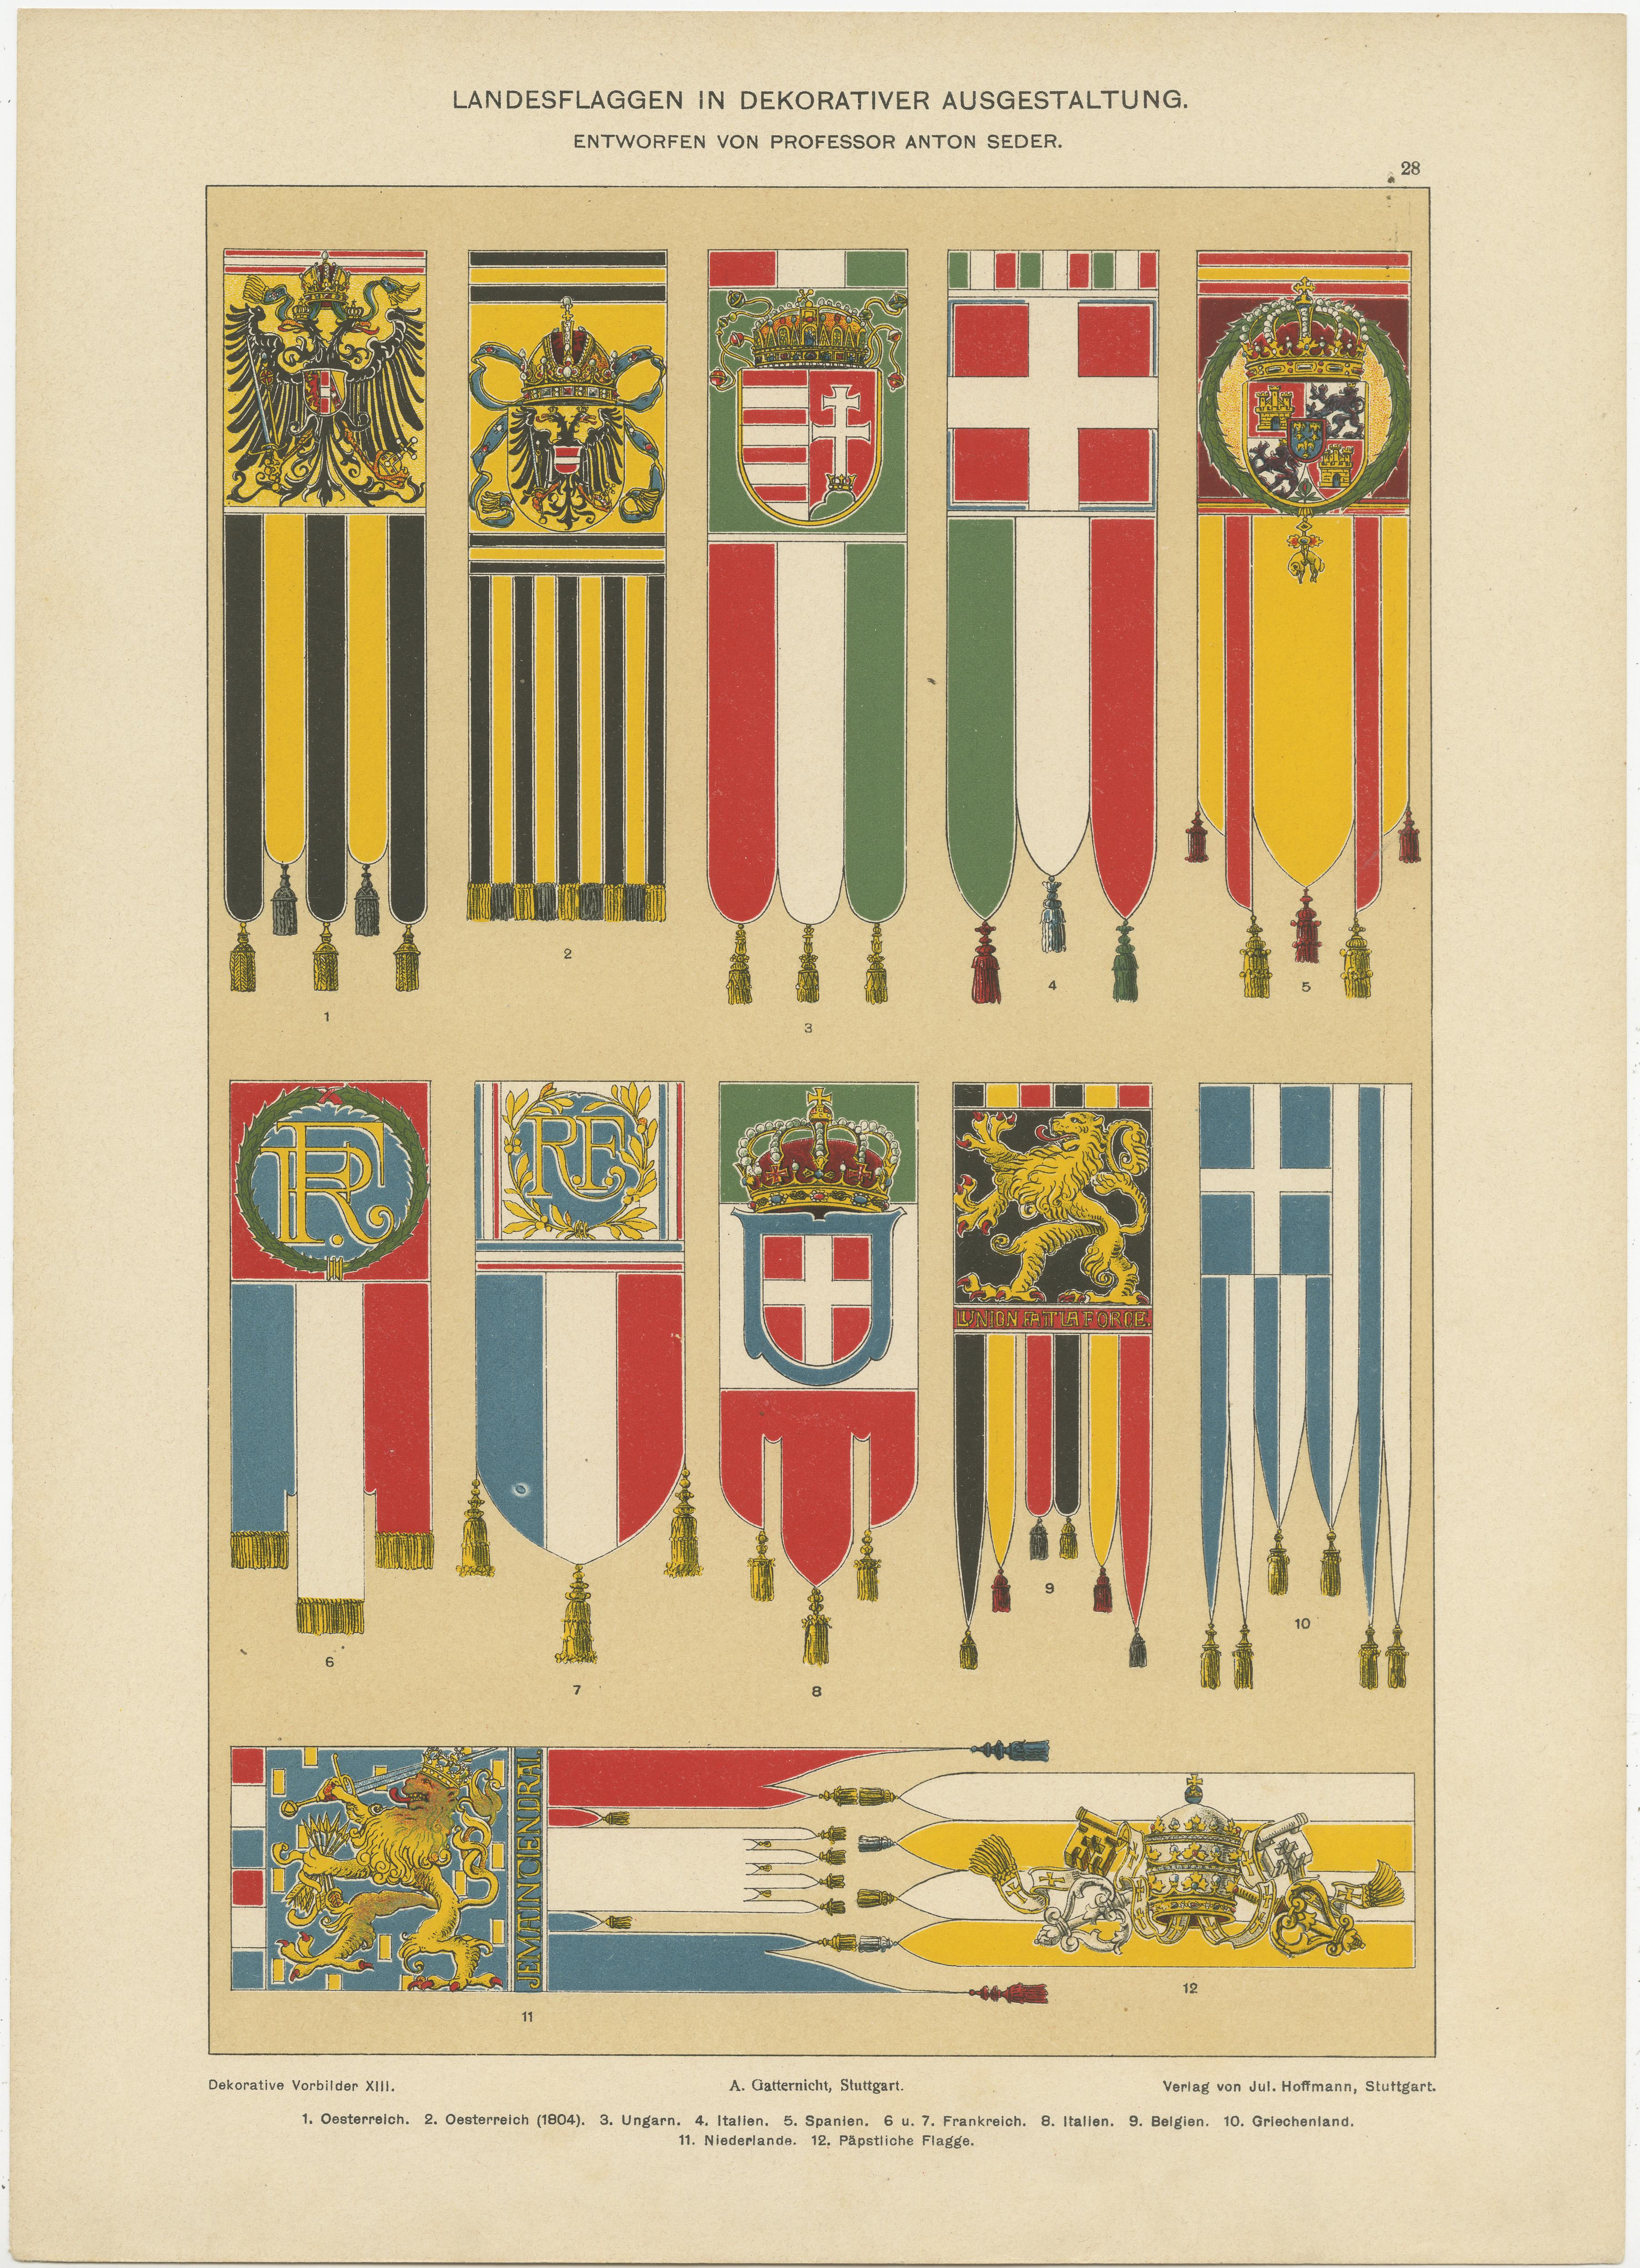 Antique print titled 'Landesflaggen in dekorativer Ausgestaltung'. This chromolithograph shows flags of various countries including Austria, Hungary, Italy, Spain and others. This print originates from 'Dekorative Vorbilder' published by J. Hoffman,